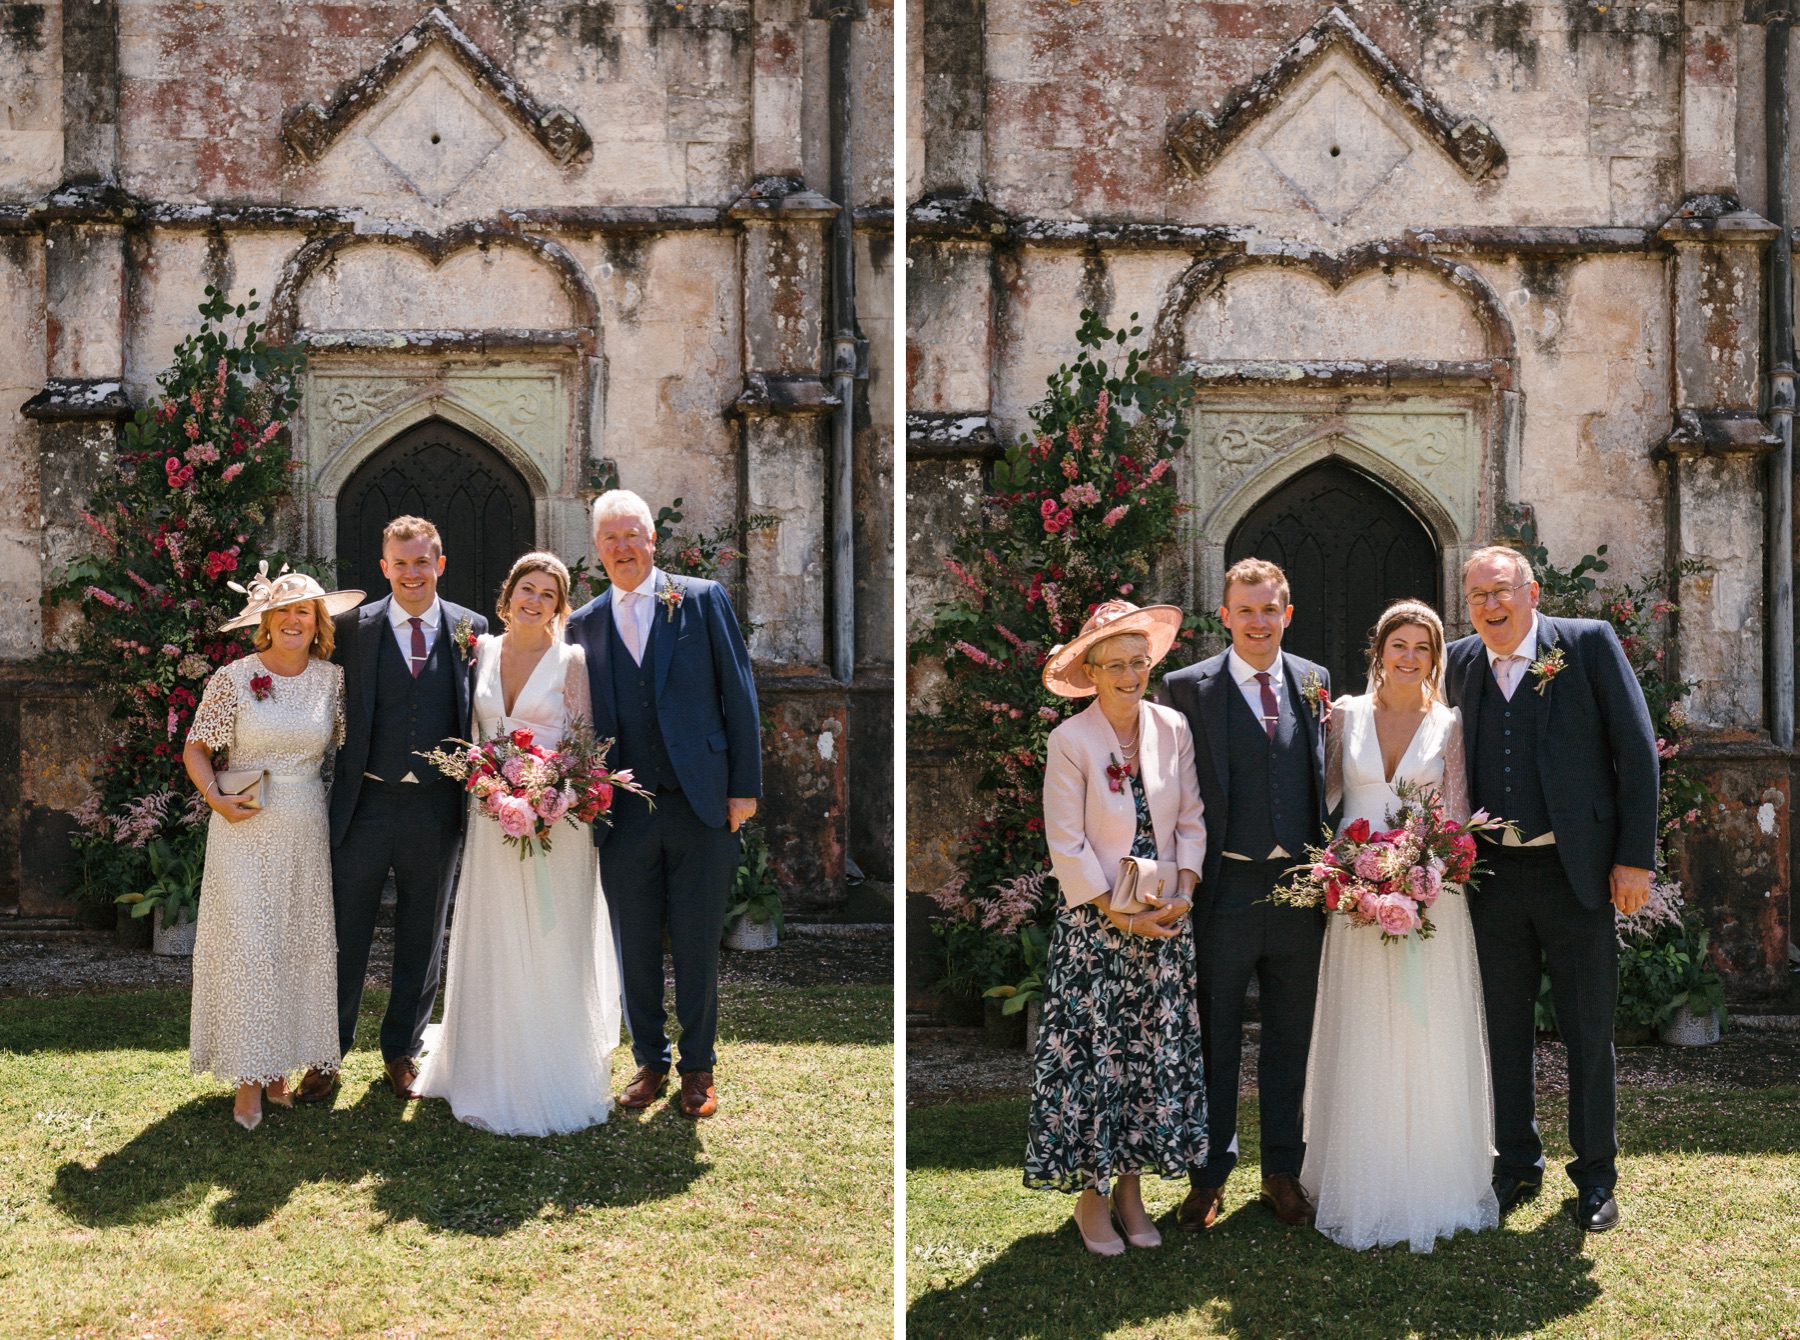 Easy informal formals - family group photography captured by Wedding photographer Cornwall Freckle  photography at Trelowarren Estate